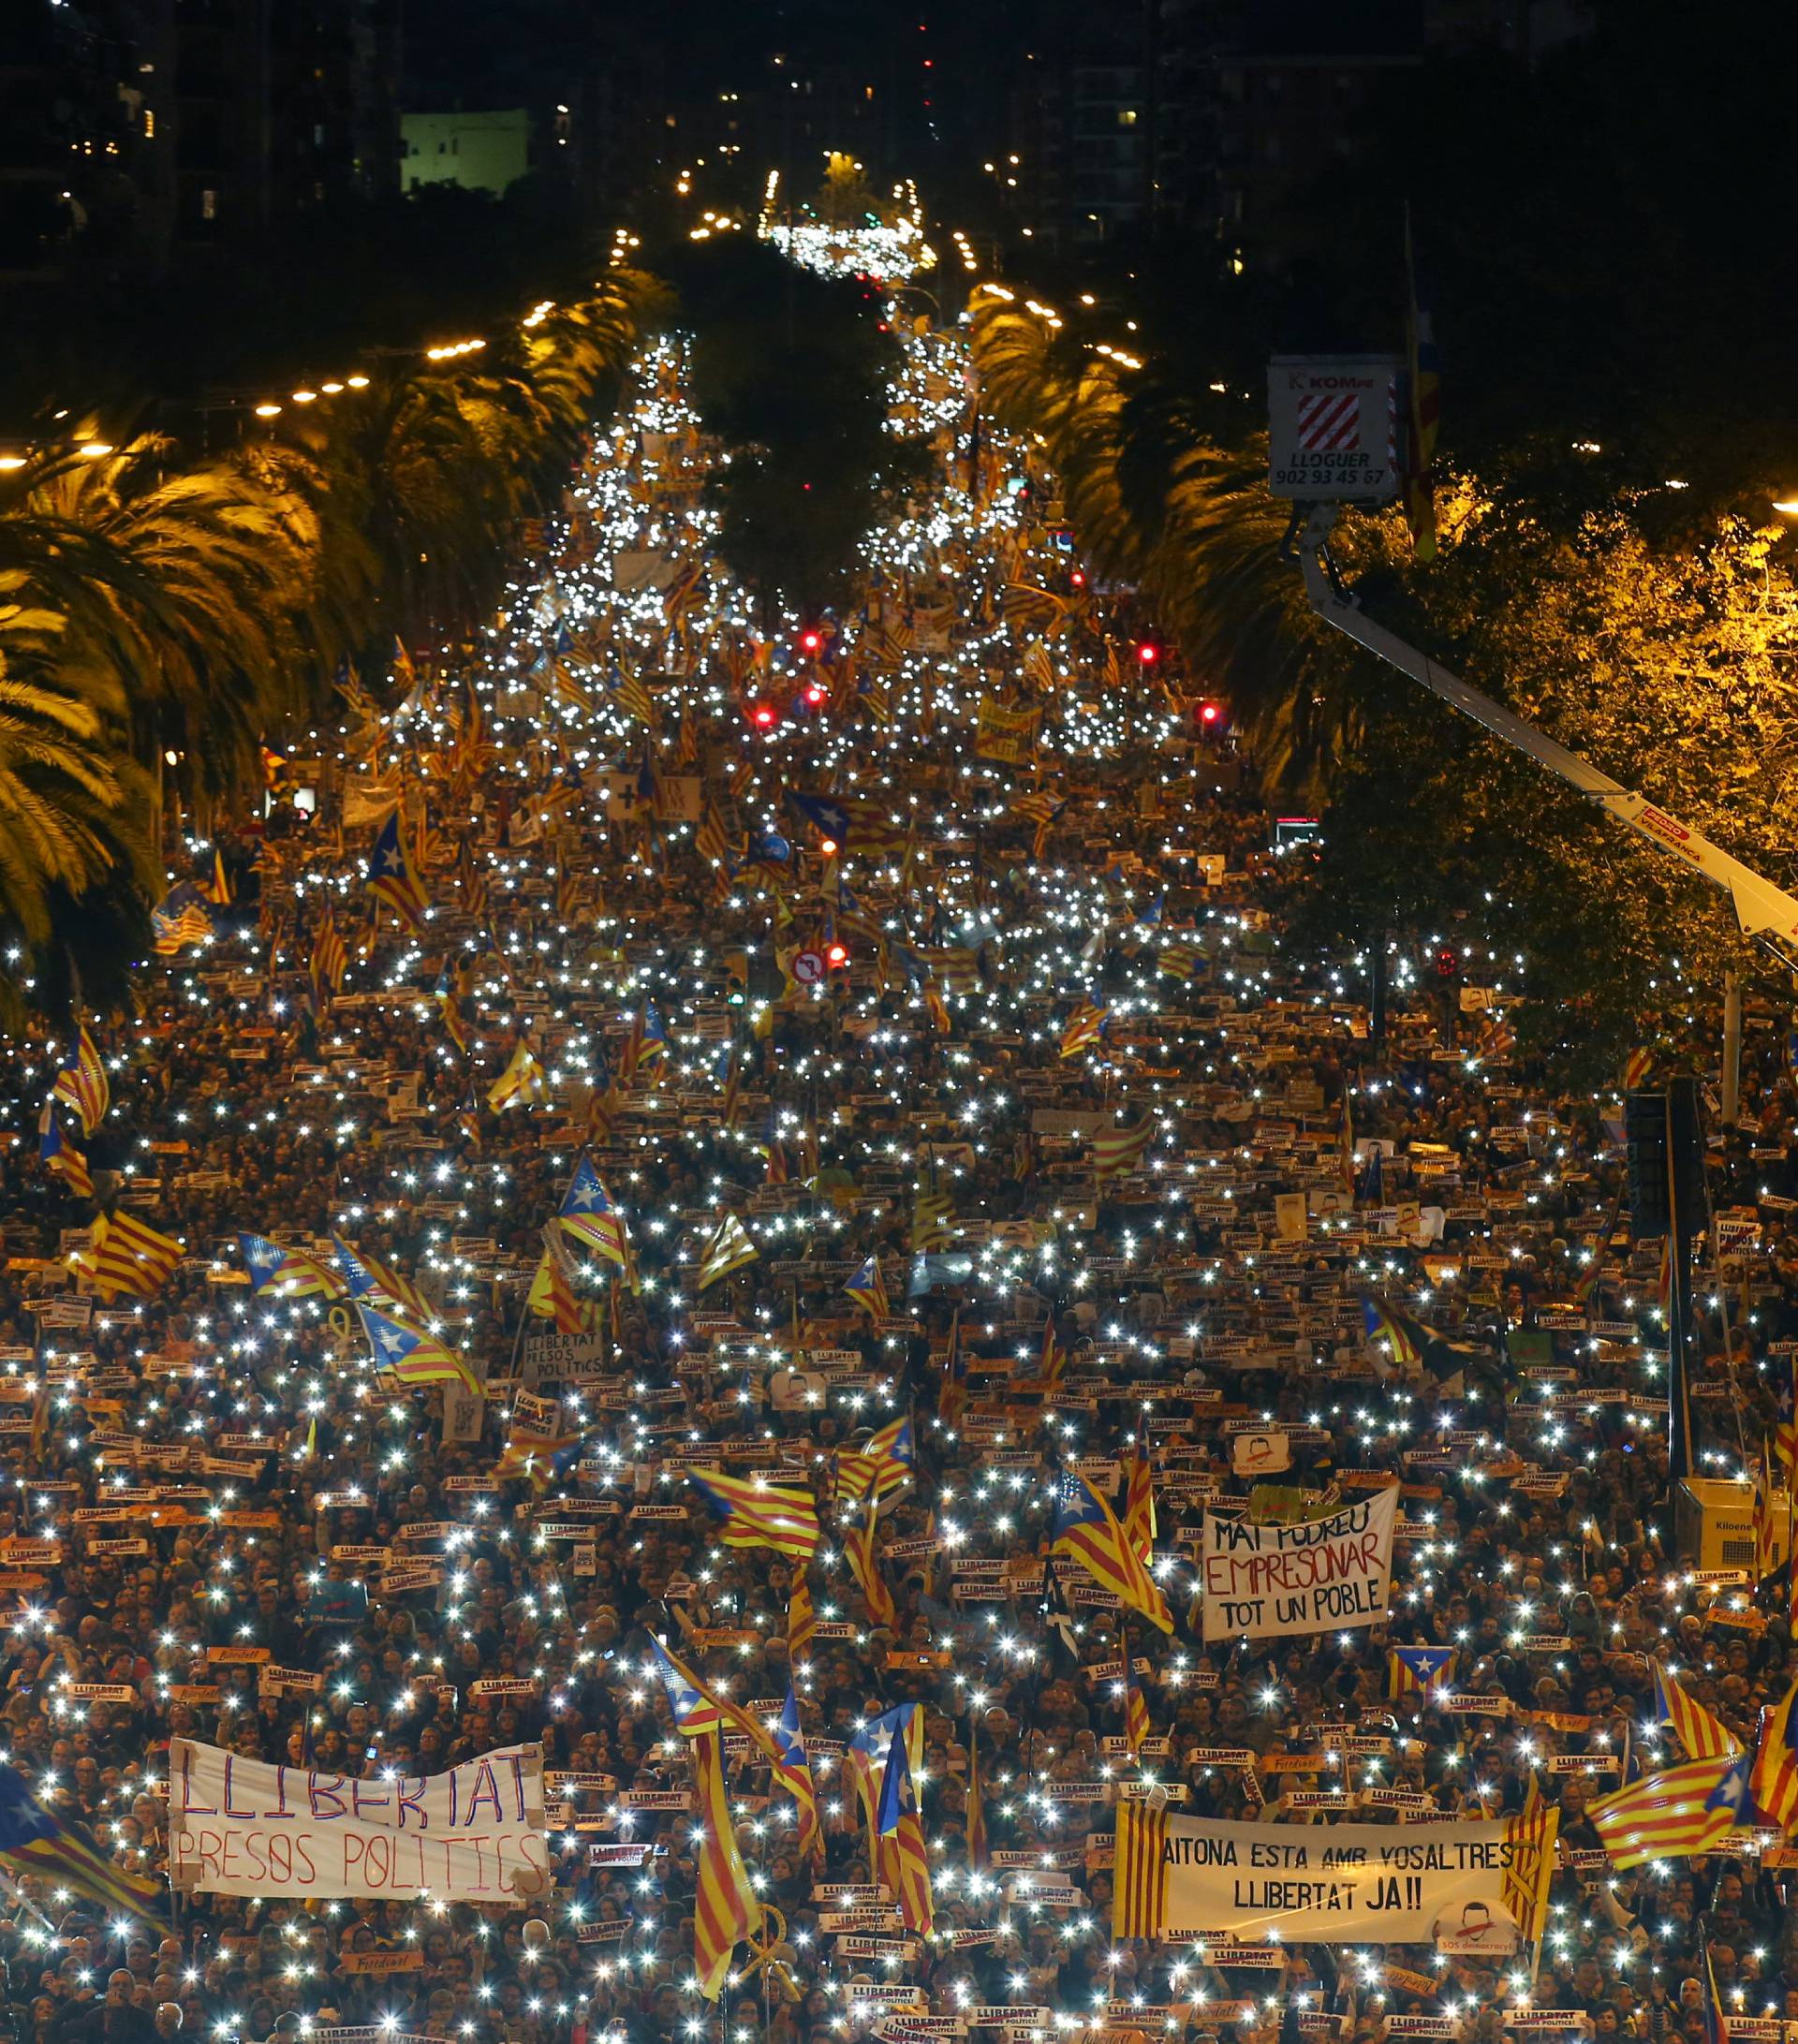 Protestors hold the light of their mobiles during a demonstration called by pro-independence associations asking for the release of jailed Catalan activists and leaders in Barcelona